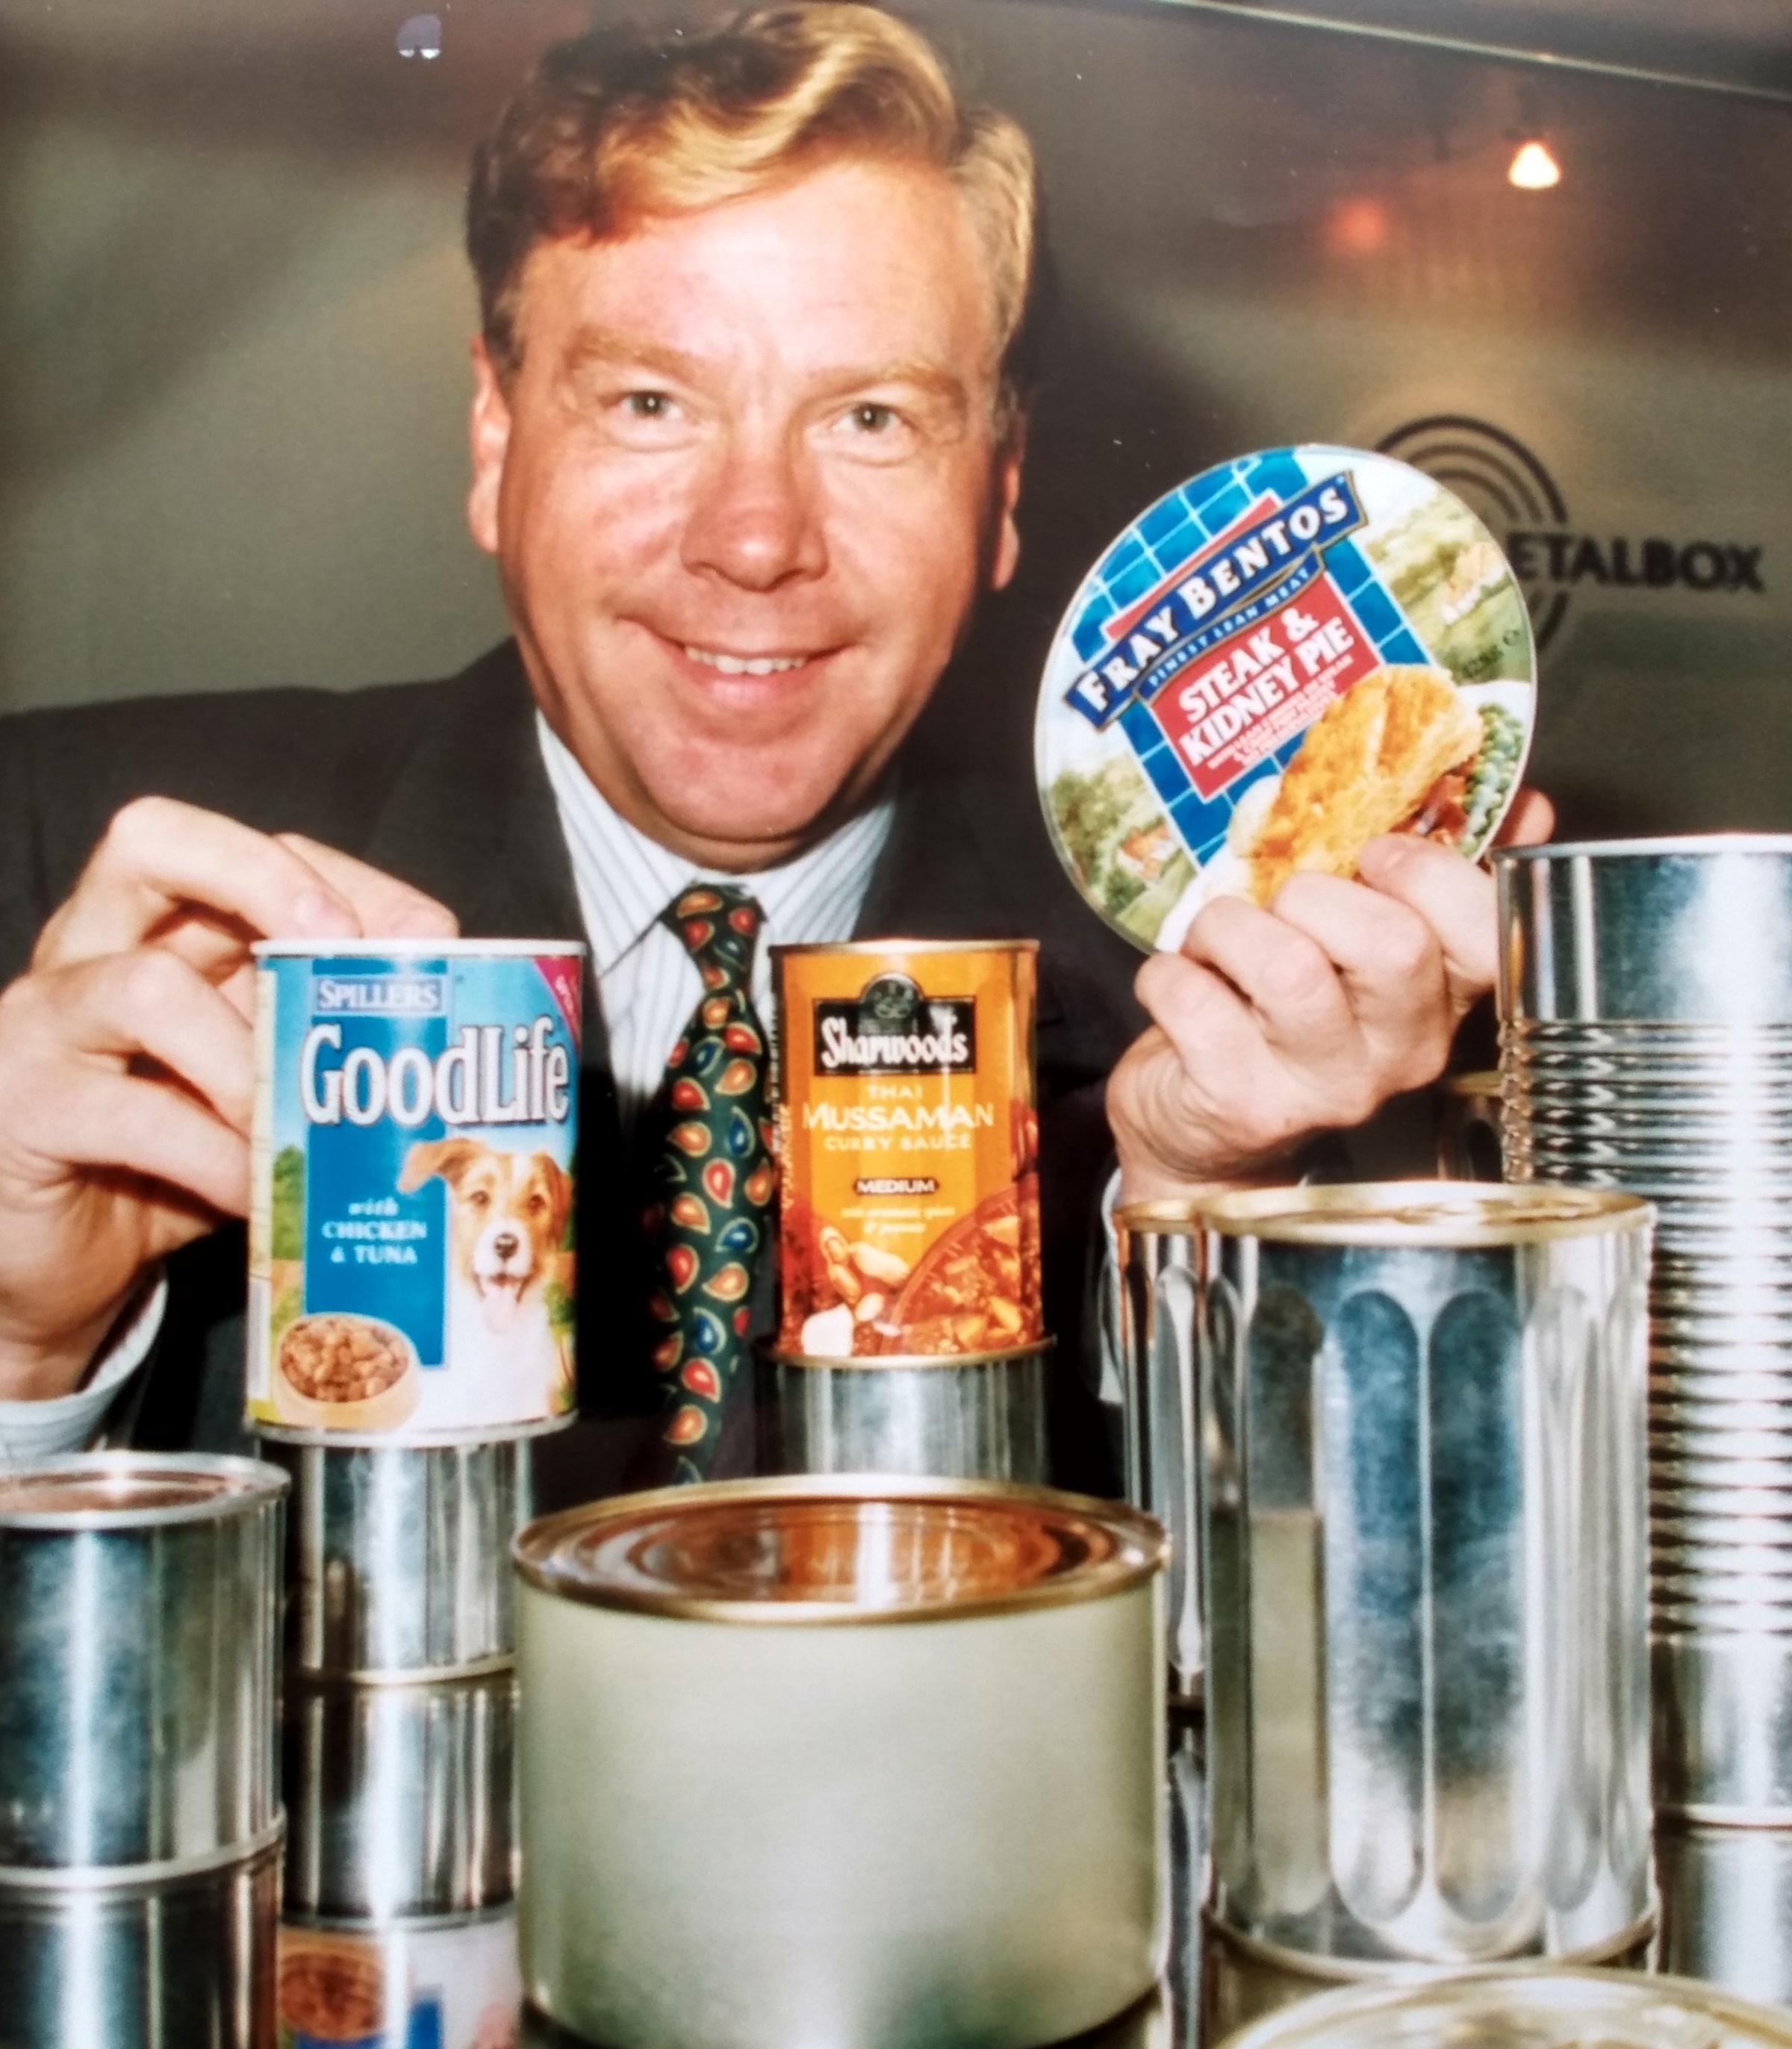 CarnaudMetalbox marketing director Nick Mullen with the winning cans in the MPMA Best in Metal contest in October 1994